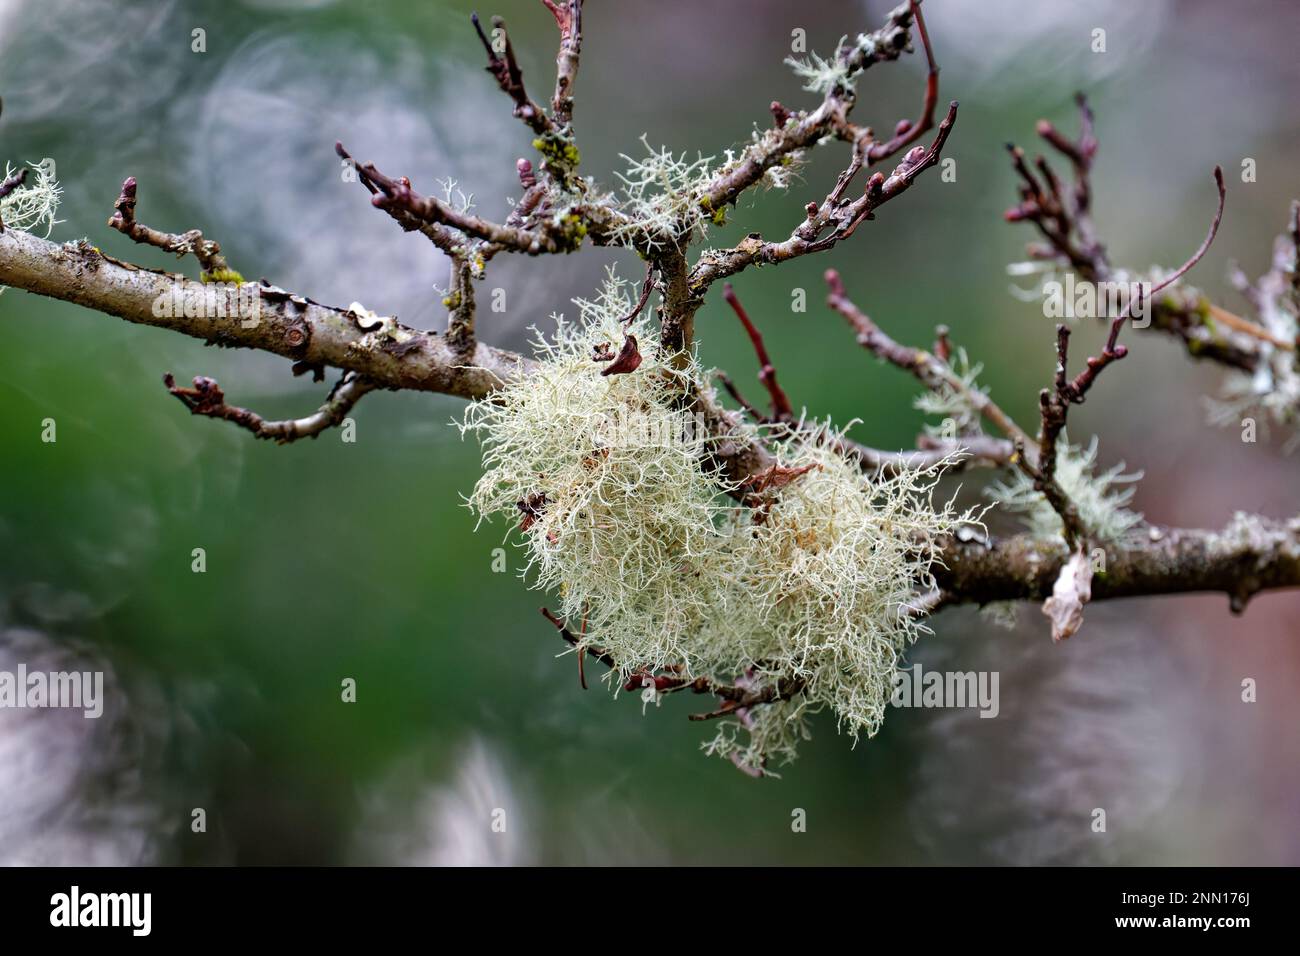 A closeup of usnea barbata and moss growing on a tree branch Stock Photo